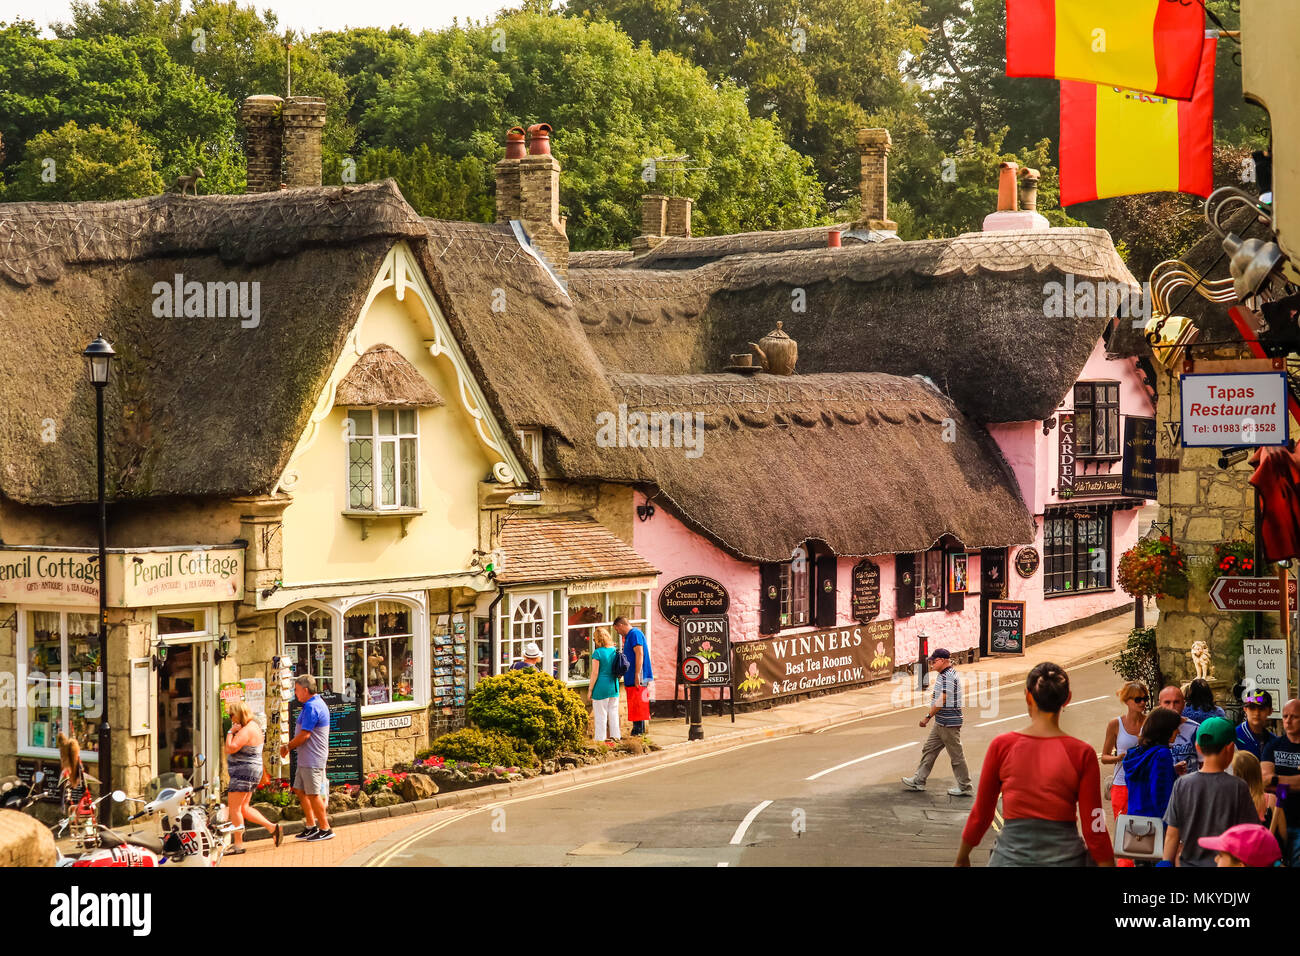 Seaside town of Shanklin, Isle of Wight, United Kingdom;  August 27, 2016; View of main street of the downtown area; people walking in the street; Stock Photo